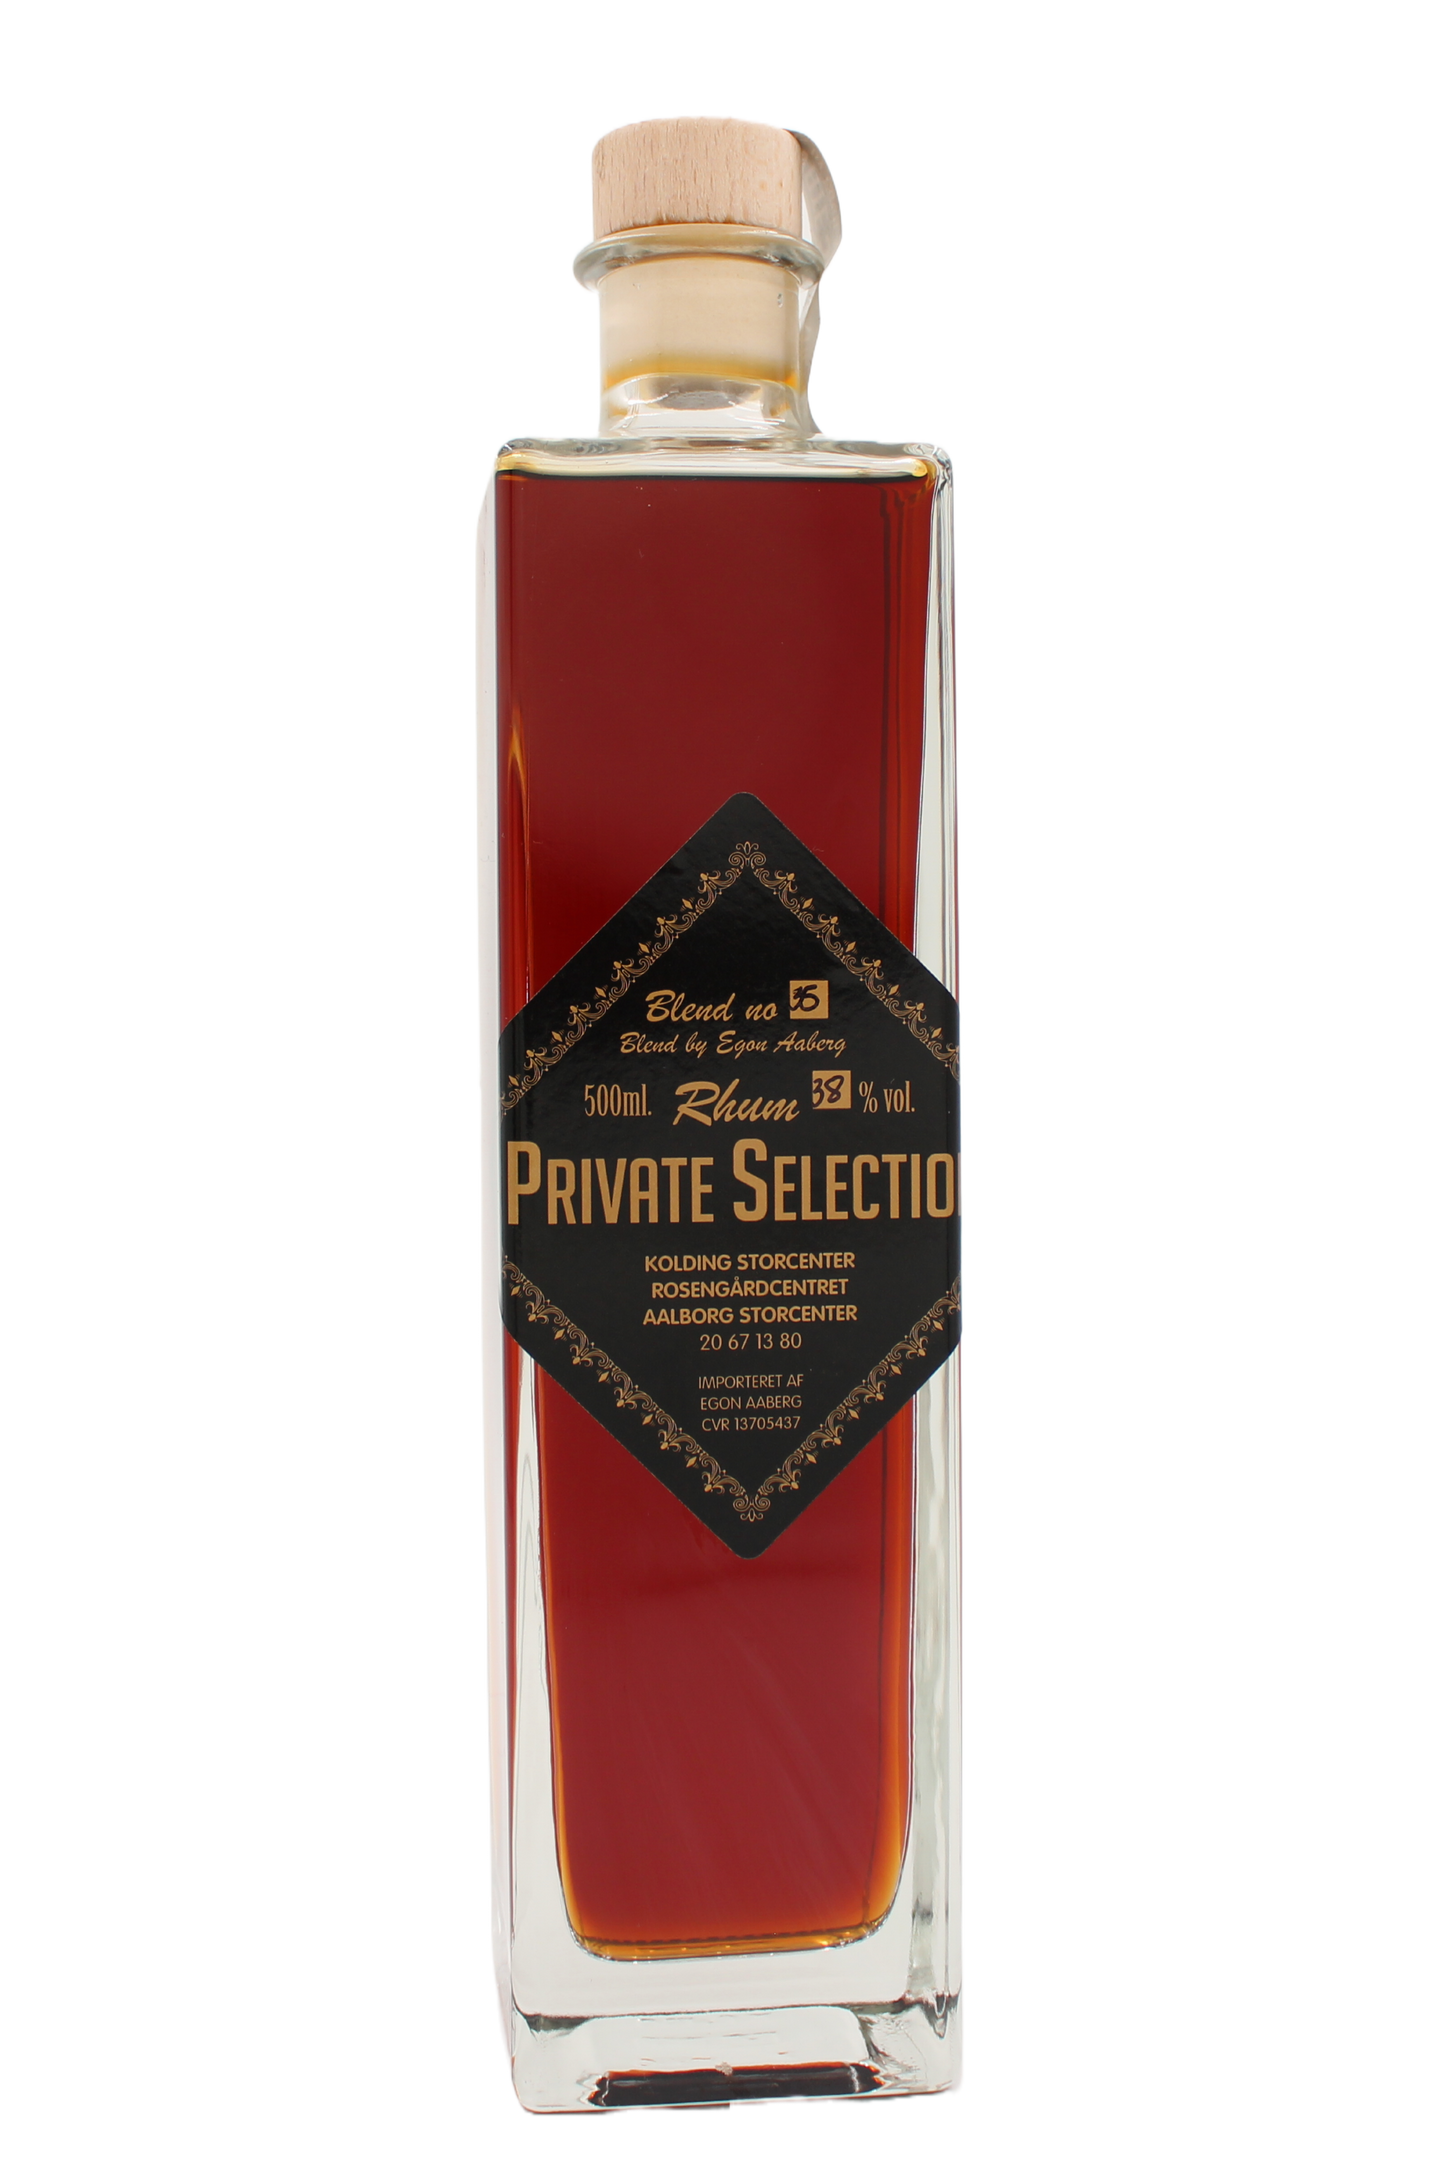 Private Selection - Blend no. 35